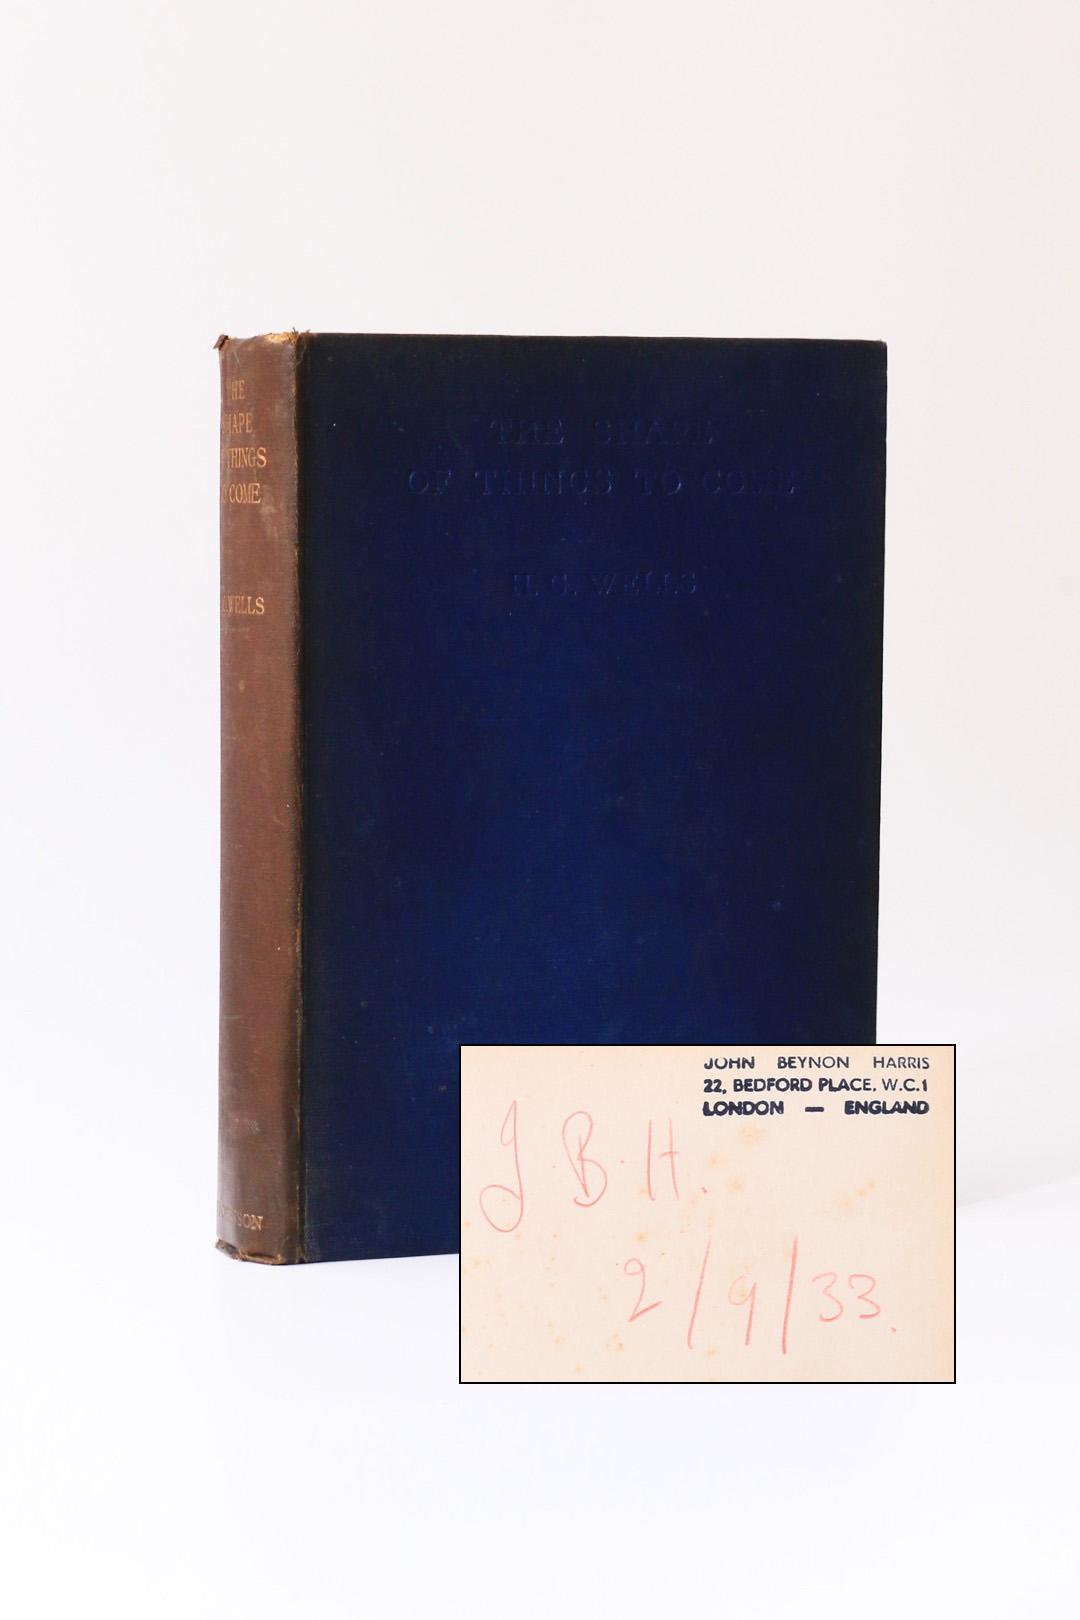 H.G. Wells - The Shape of Things to Come - John Wyndham's Copy - Hutchinson, 1933, First Edition.